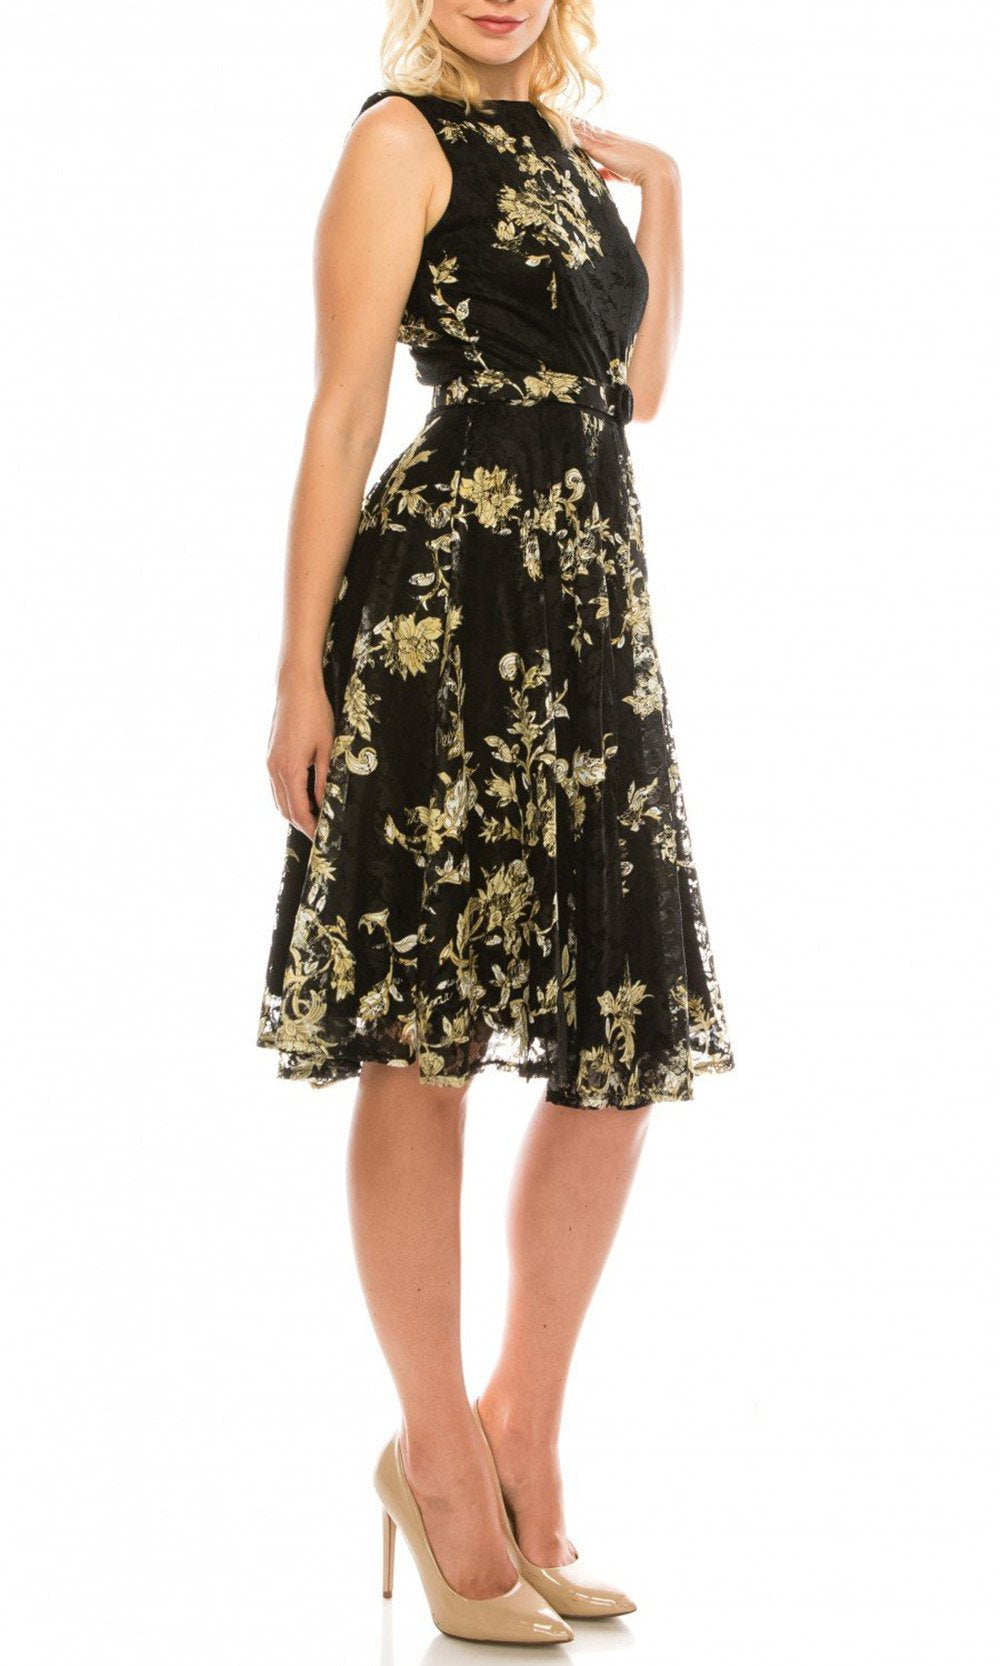 Gabby Skye - 57174MG Floral Filigree Printed Lace Dress In Black and Gold